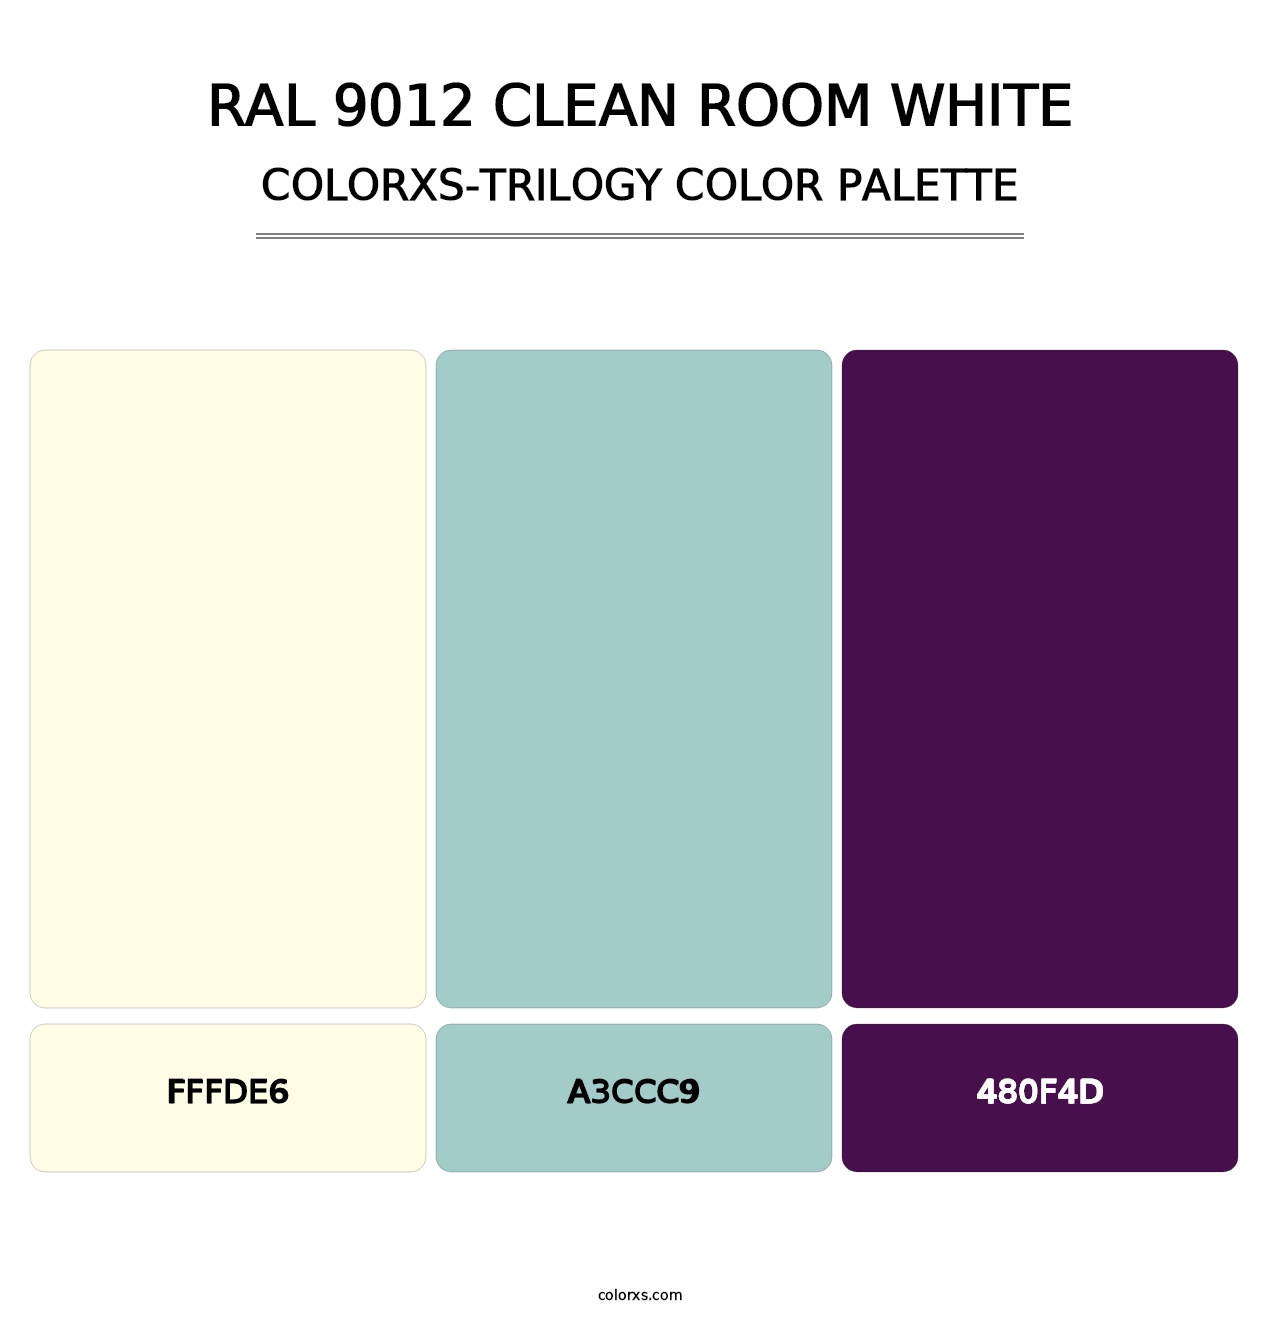 RAL 9012 Clean Room White - Colorxs Trilogy Palette